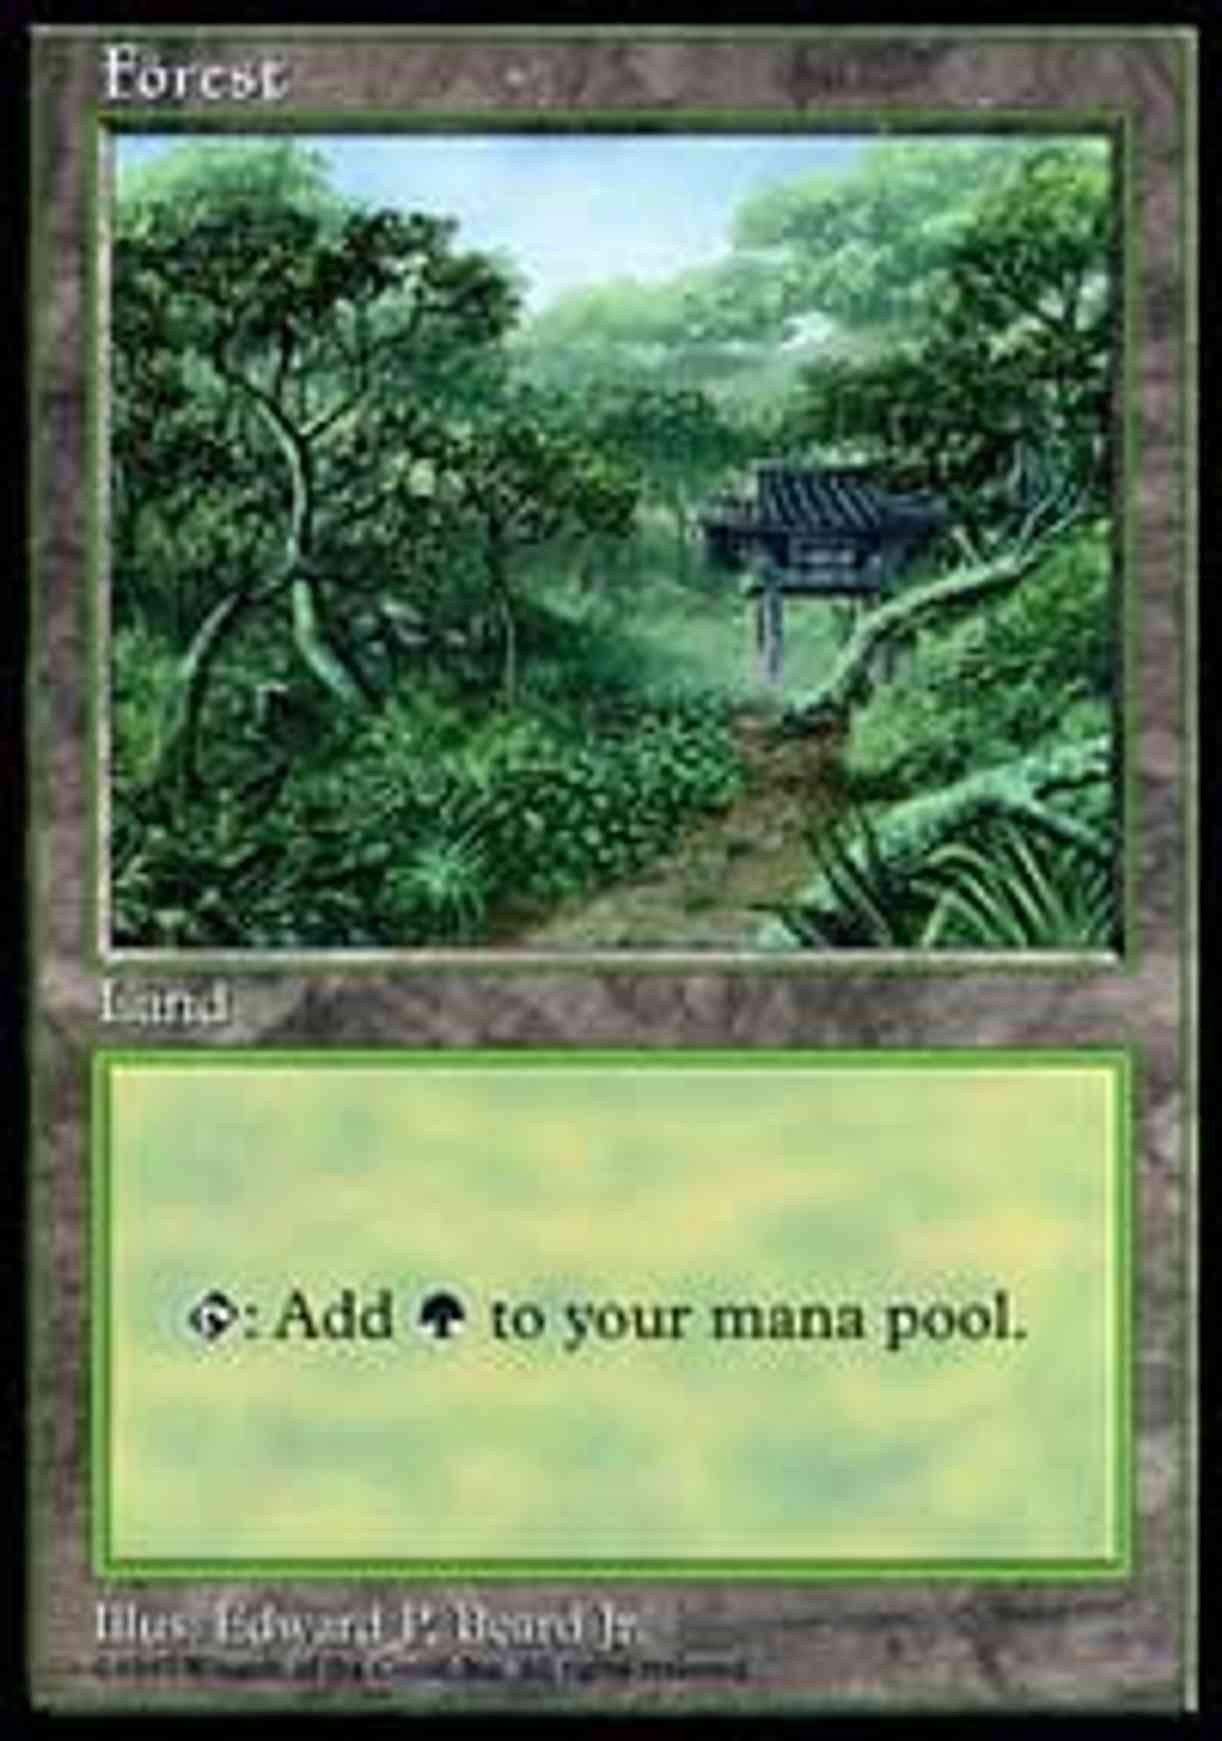 Forest - Clear Pack (Beard, Jr.) magic card front